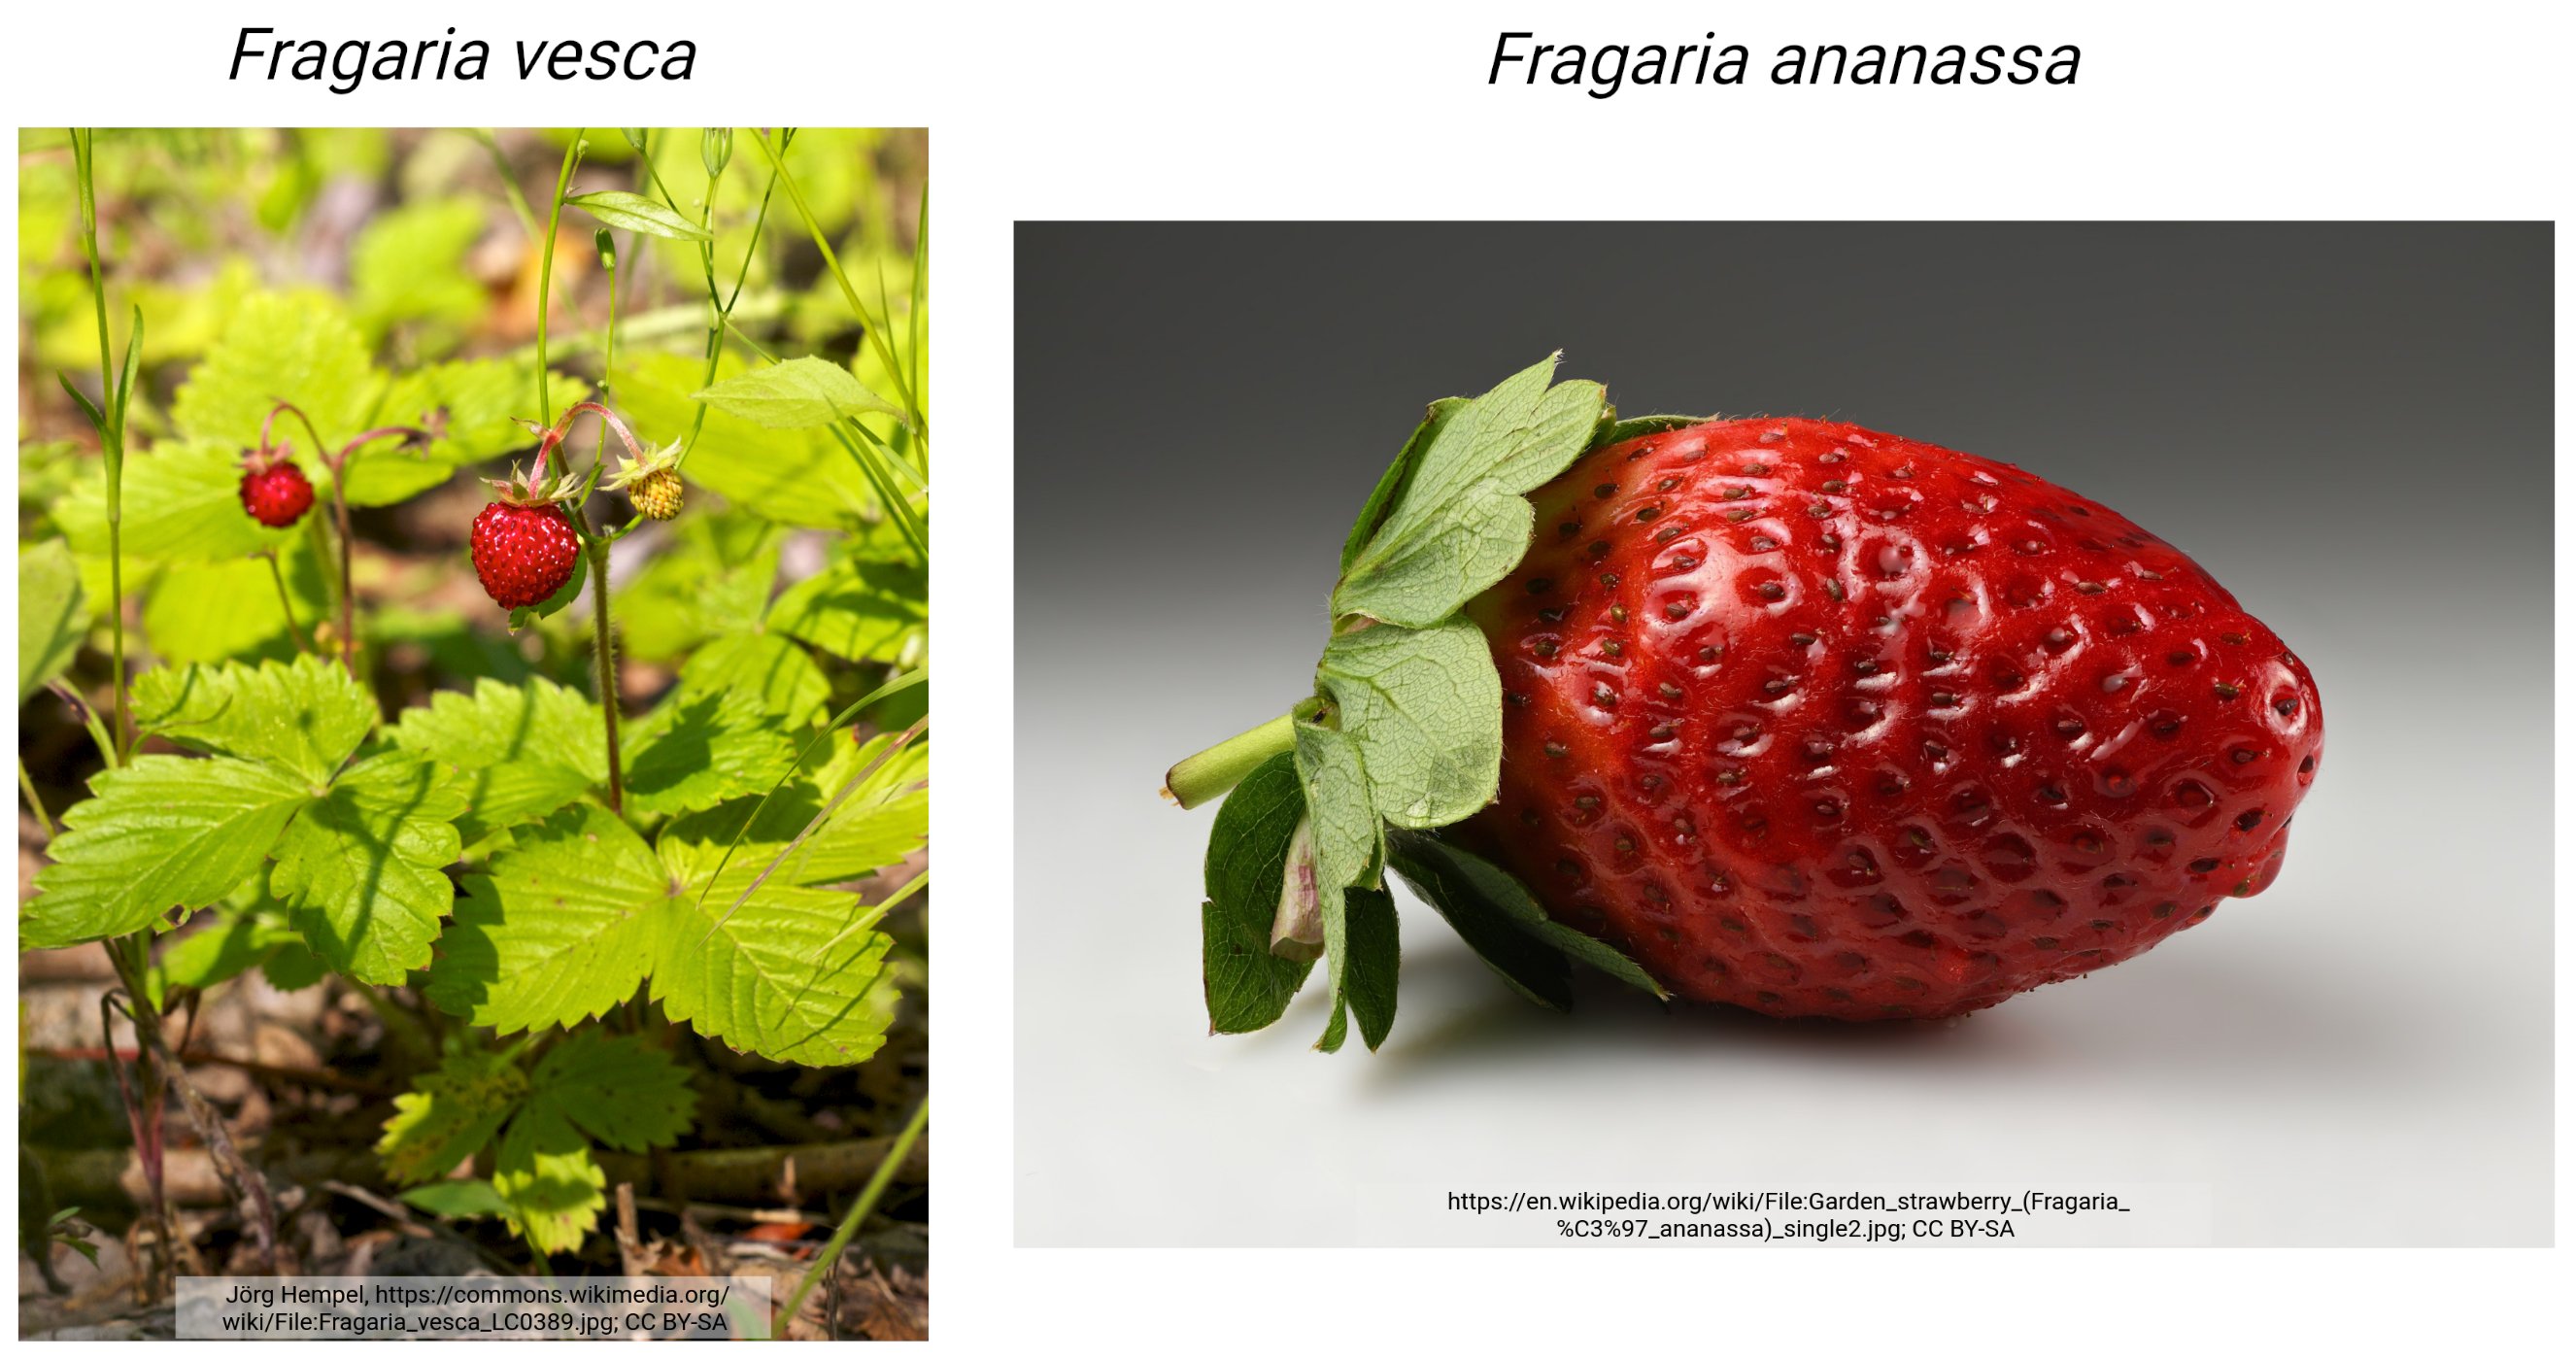 Two strawberry DFRs show substrate specificity differences (73)